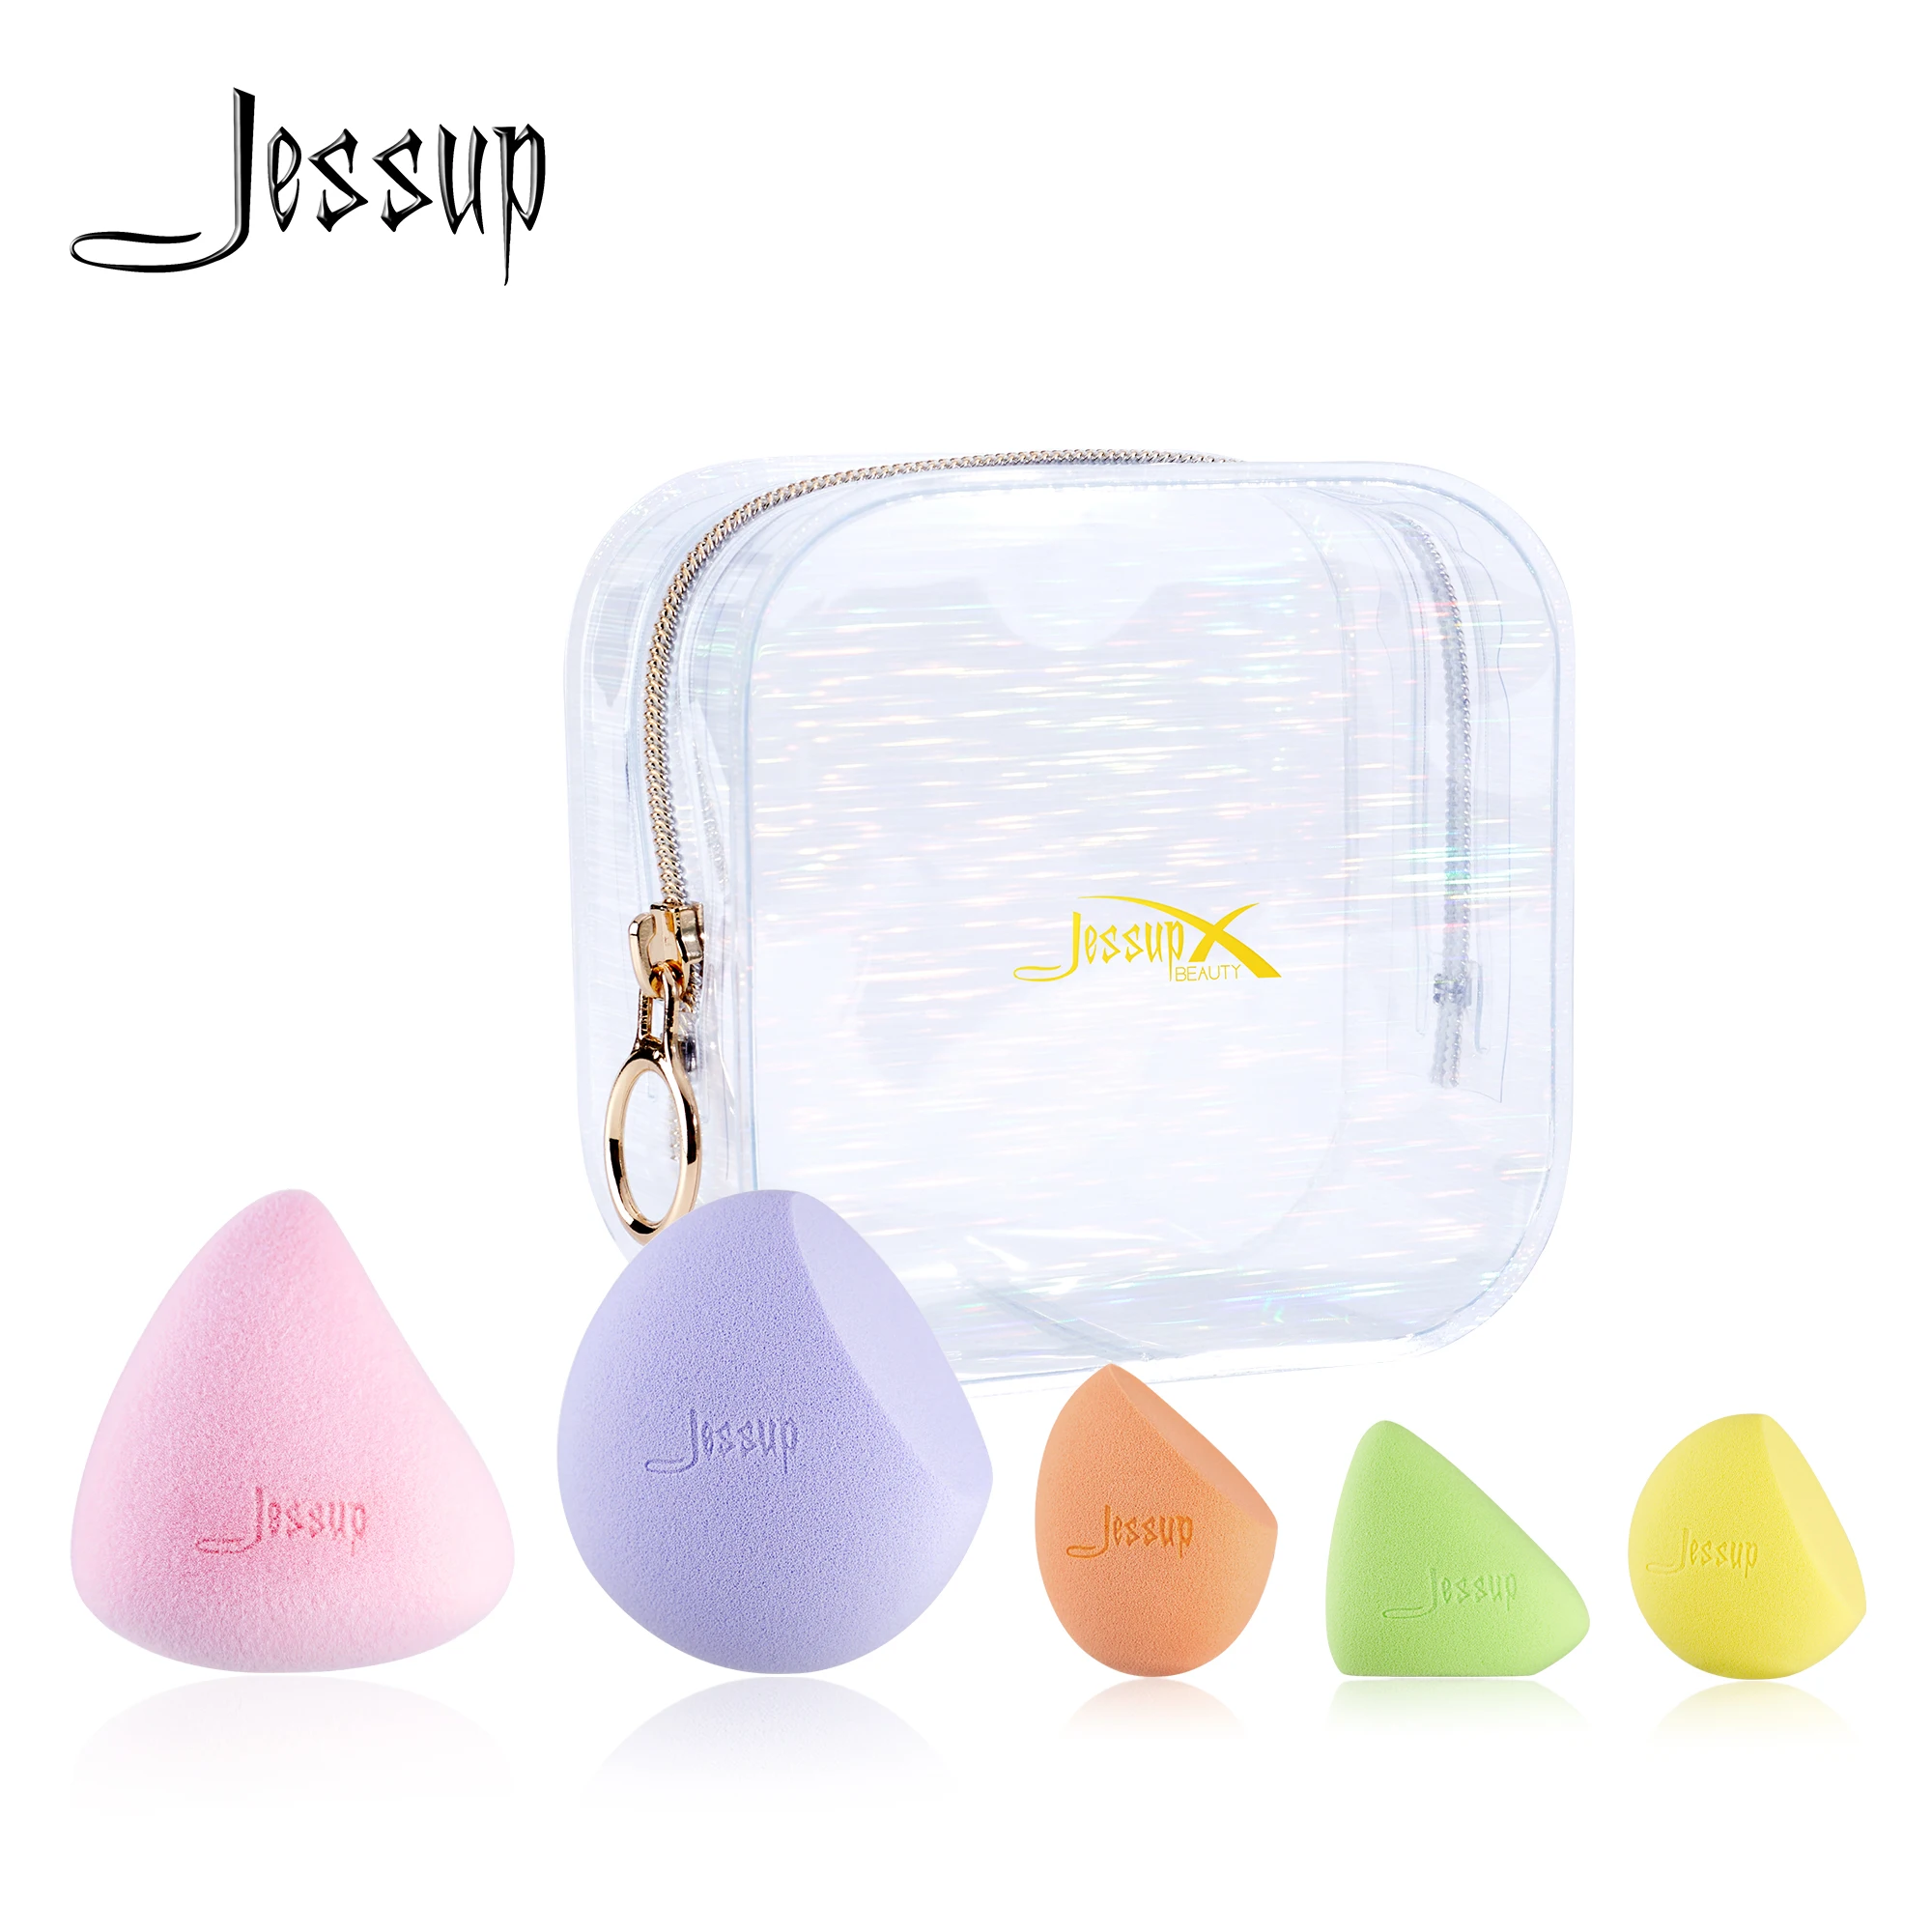 

Jessup Makeup Sponges Set Powder Concealer Cosmetic Puff Face Foundation Make Up Puffs Soft Smooth Travel Beauty Tools Kits